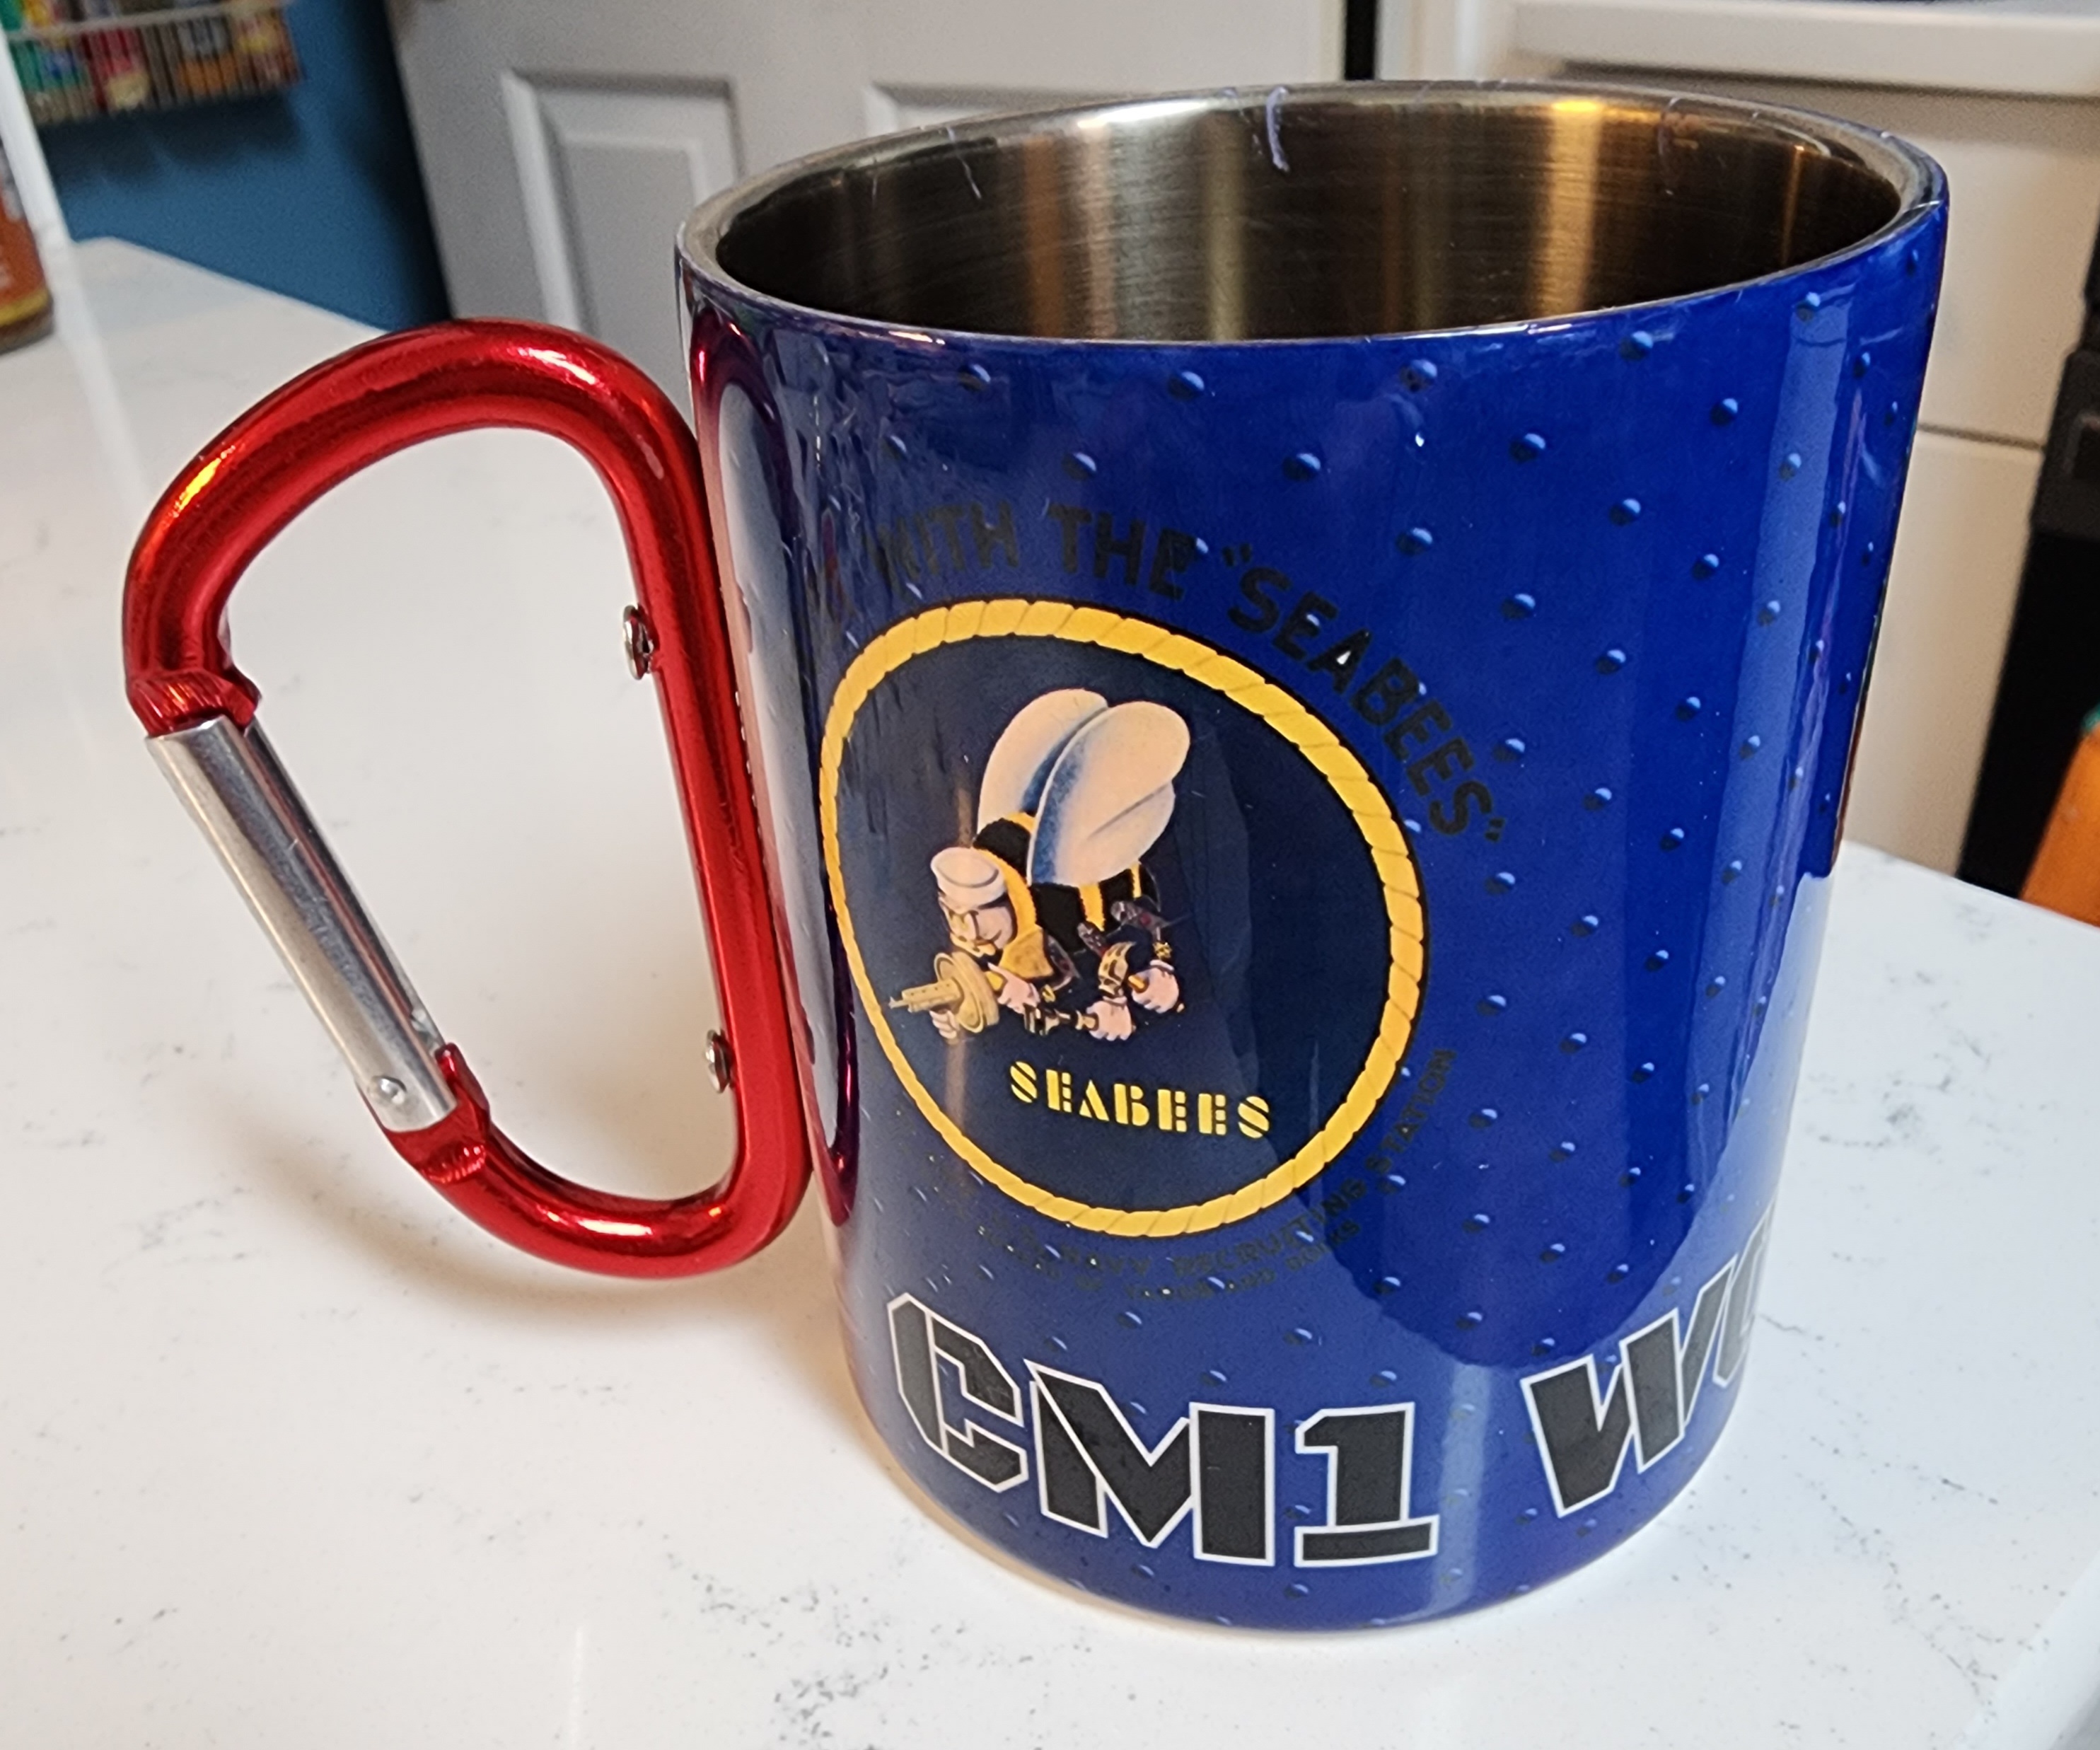 I was asked to make carabiner clip mugs and was elated to see that Conde sold them! The custome